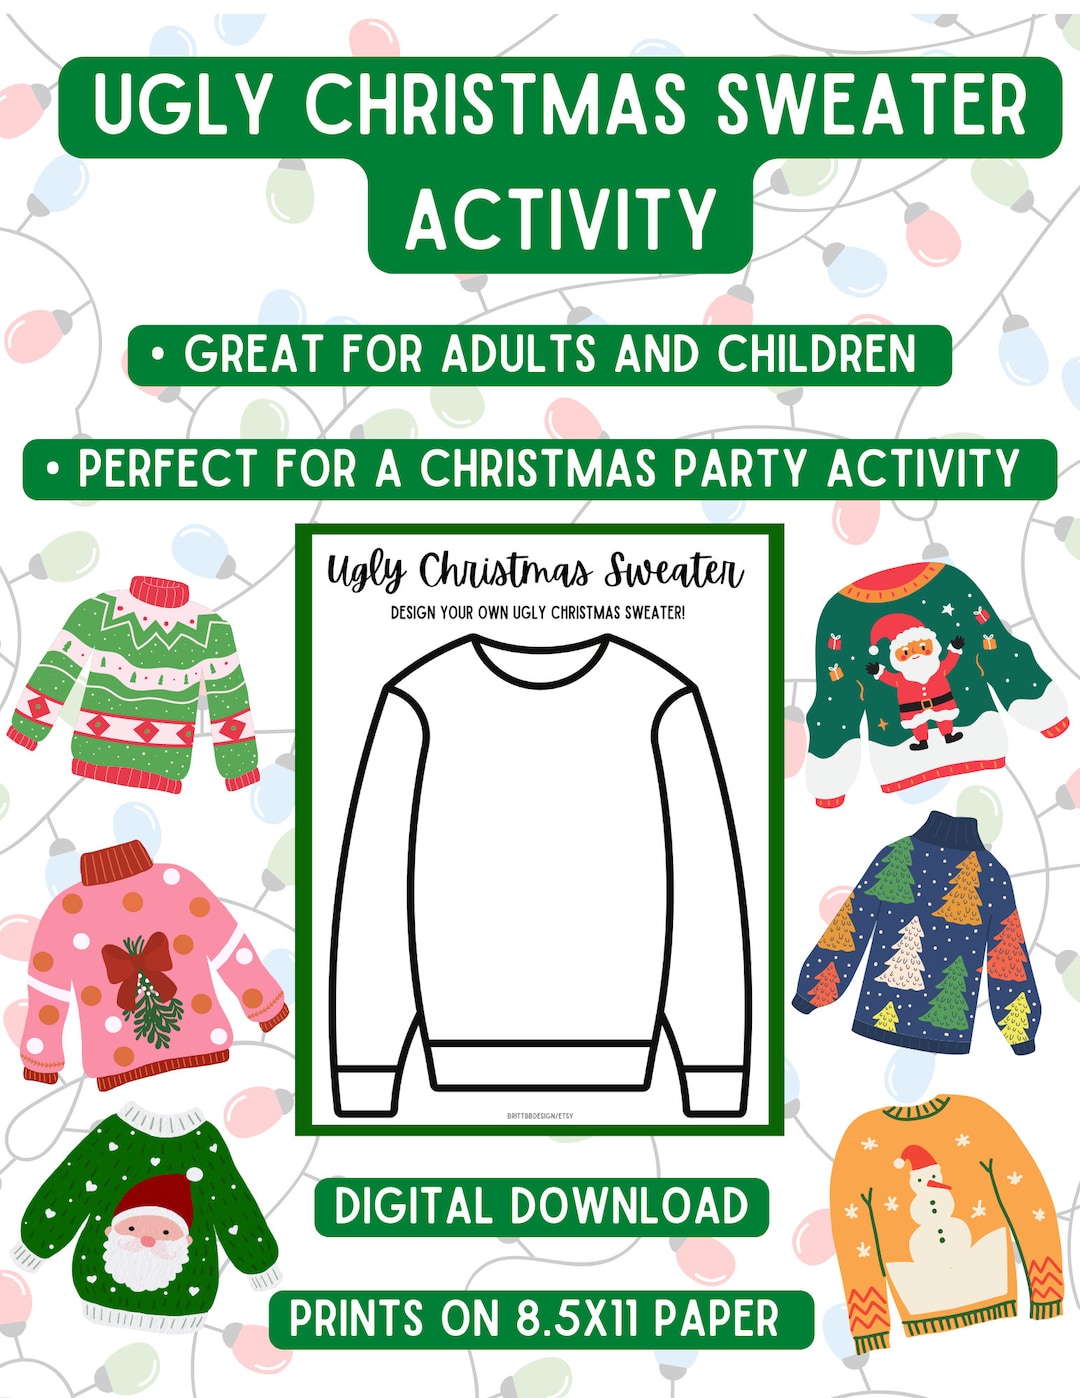 Ugly Christmas Sweater Activity - Etsy